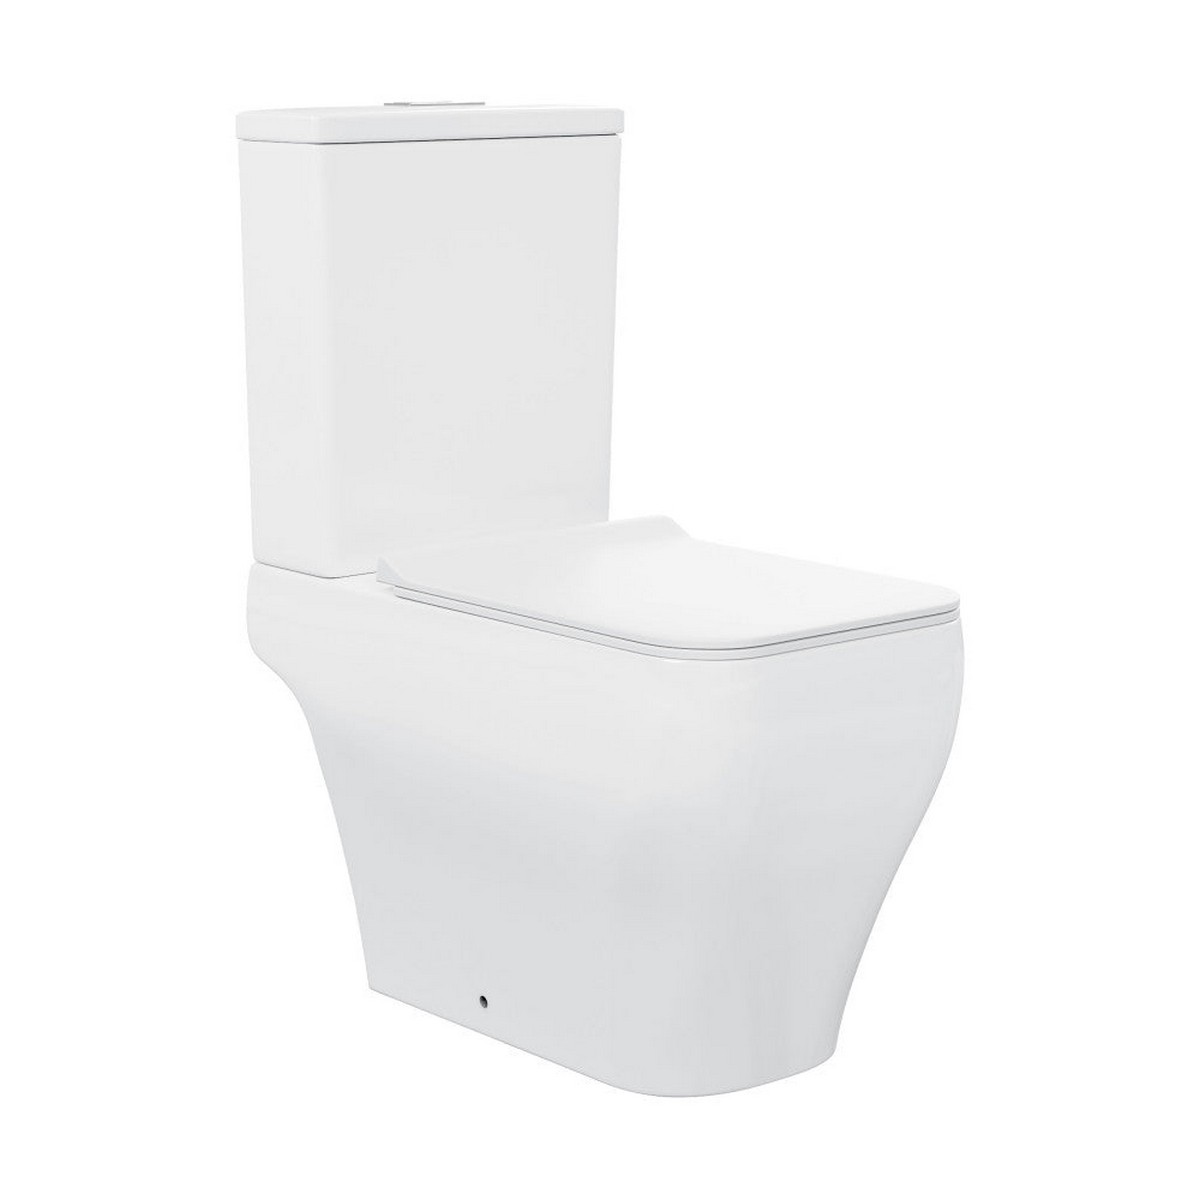 SWISS MADISON SM-2T141 NADAR 1.1/1.6 GPF DUAL FLUSH TWO-PIECE ELONGATED TOILET IN GLOSSY WHITE